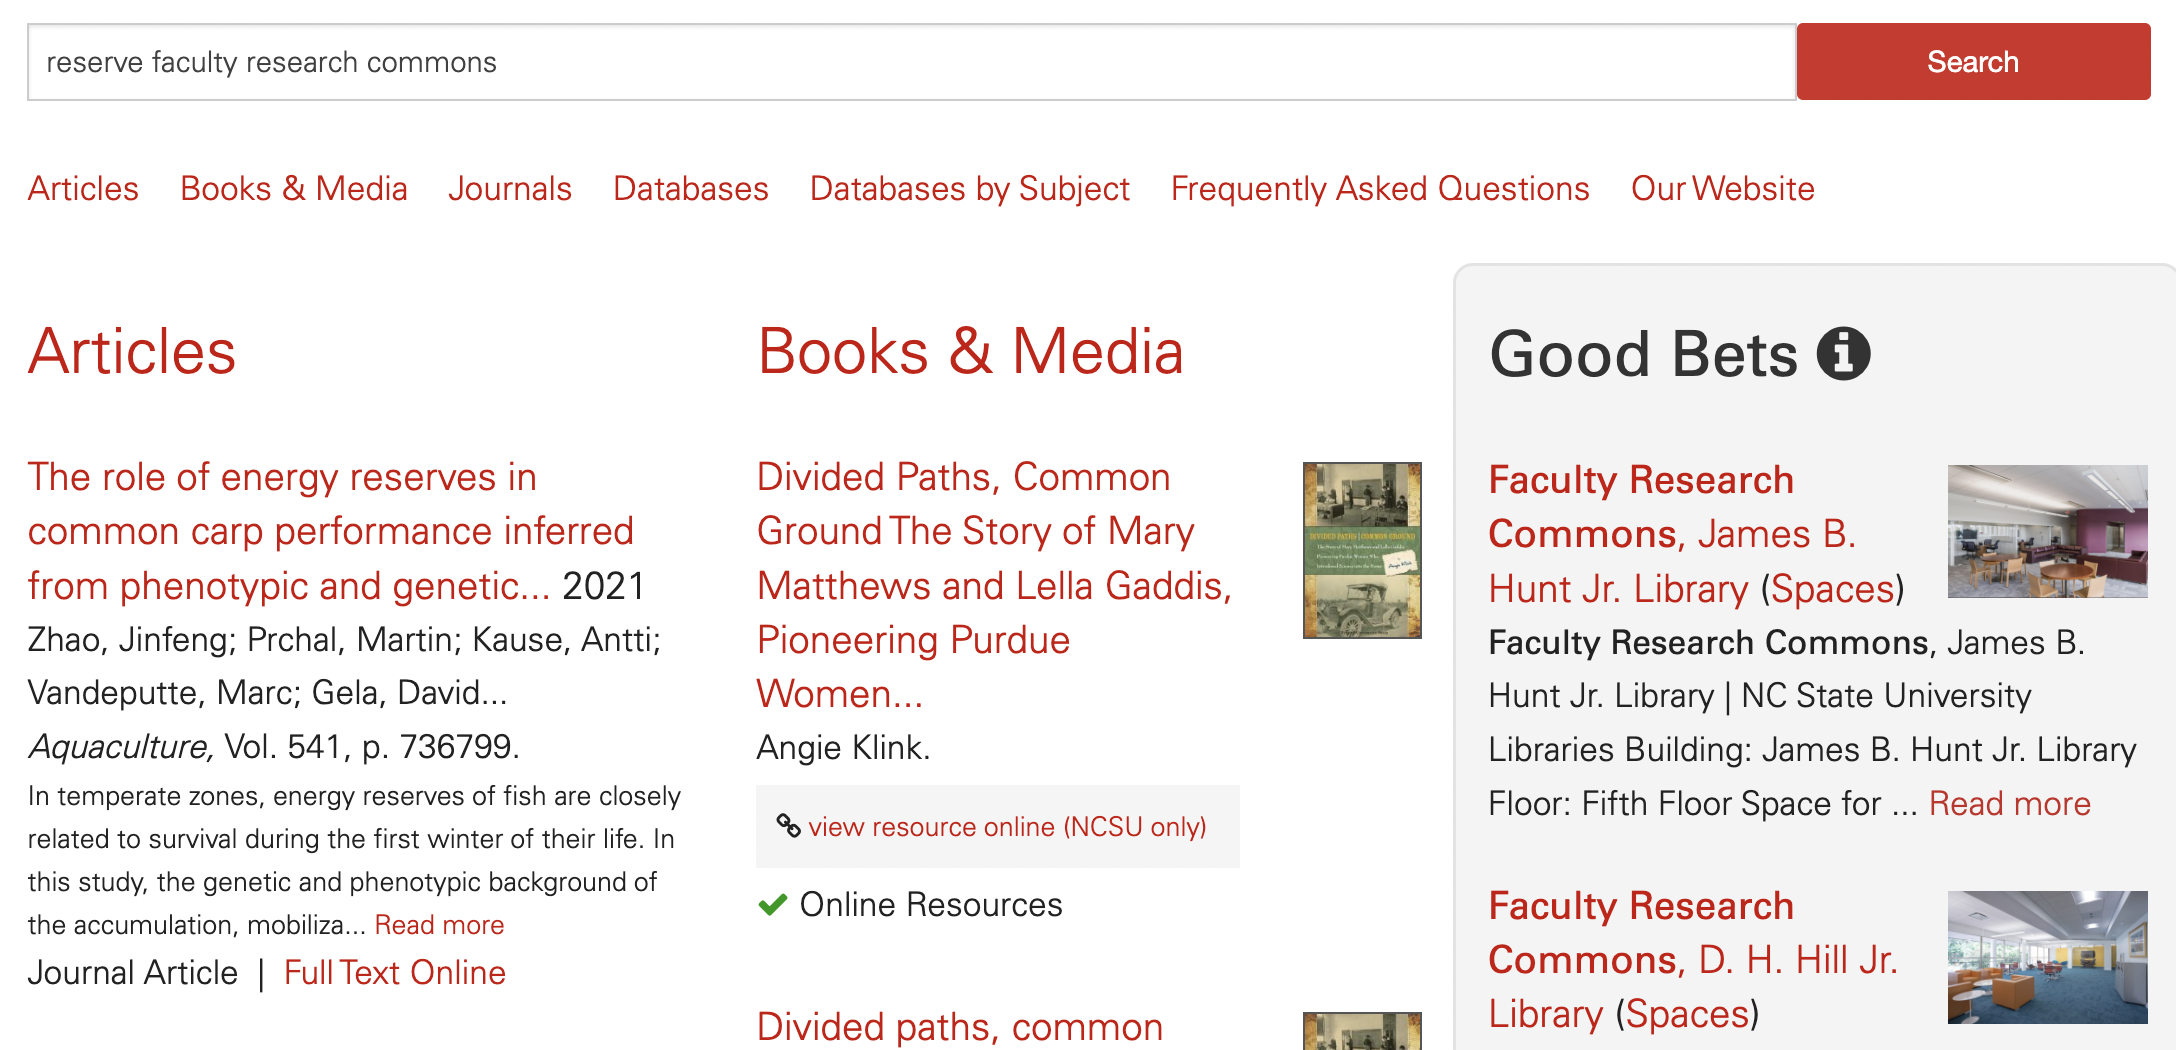 A search for “reserve faculty research commons” yields a "Good Bet"